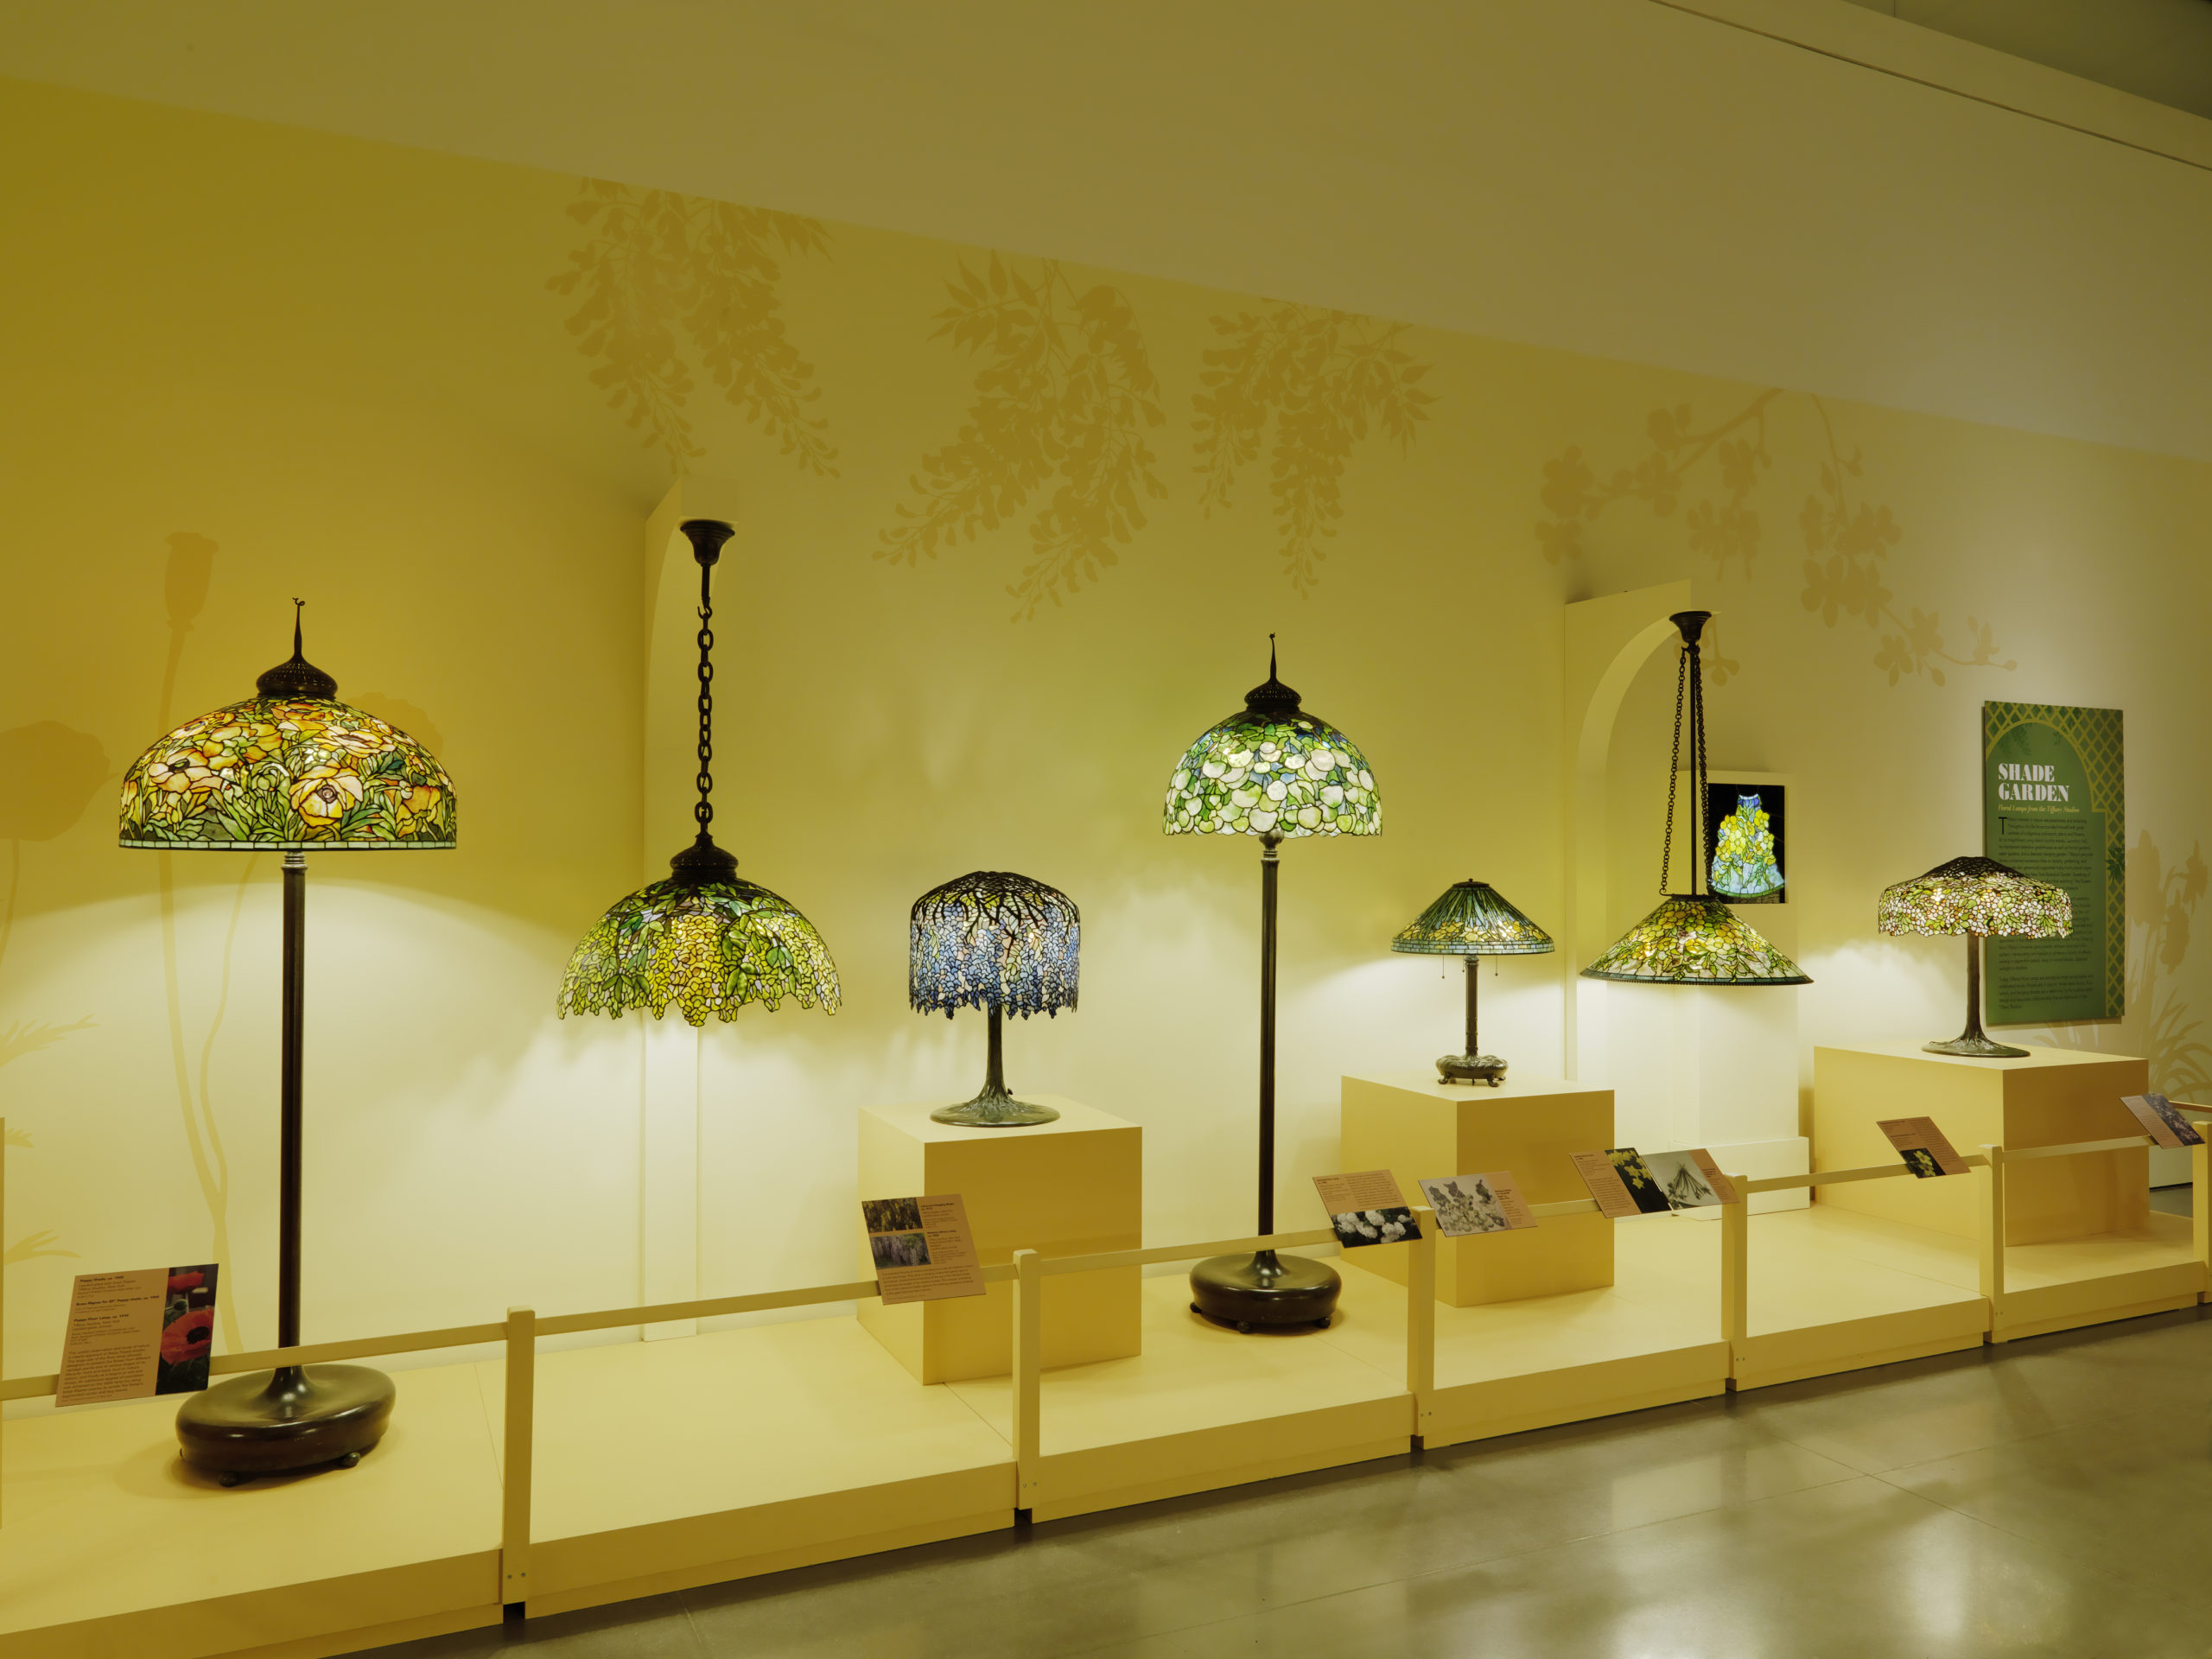 Step into a room of “ richly colored glass and sculpted bronze” Tiffany lamps with varying designs including daffodil and dragonflies. Six tall standing lamps greet you at the door with their original prices listed . Around the gallery are smaller desk lamps. The room includes video demonstrations of how to make glass and colorful glass pieces in glass cases.